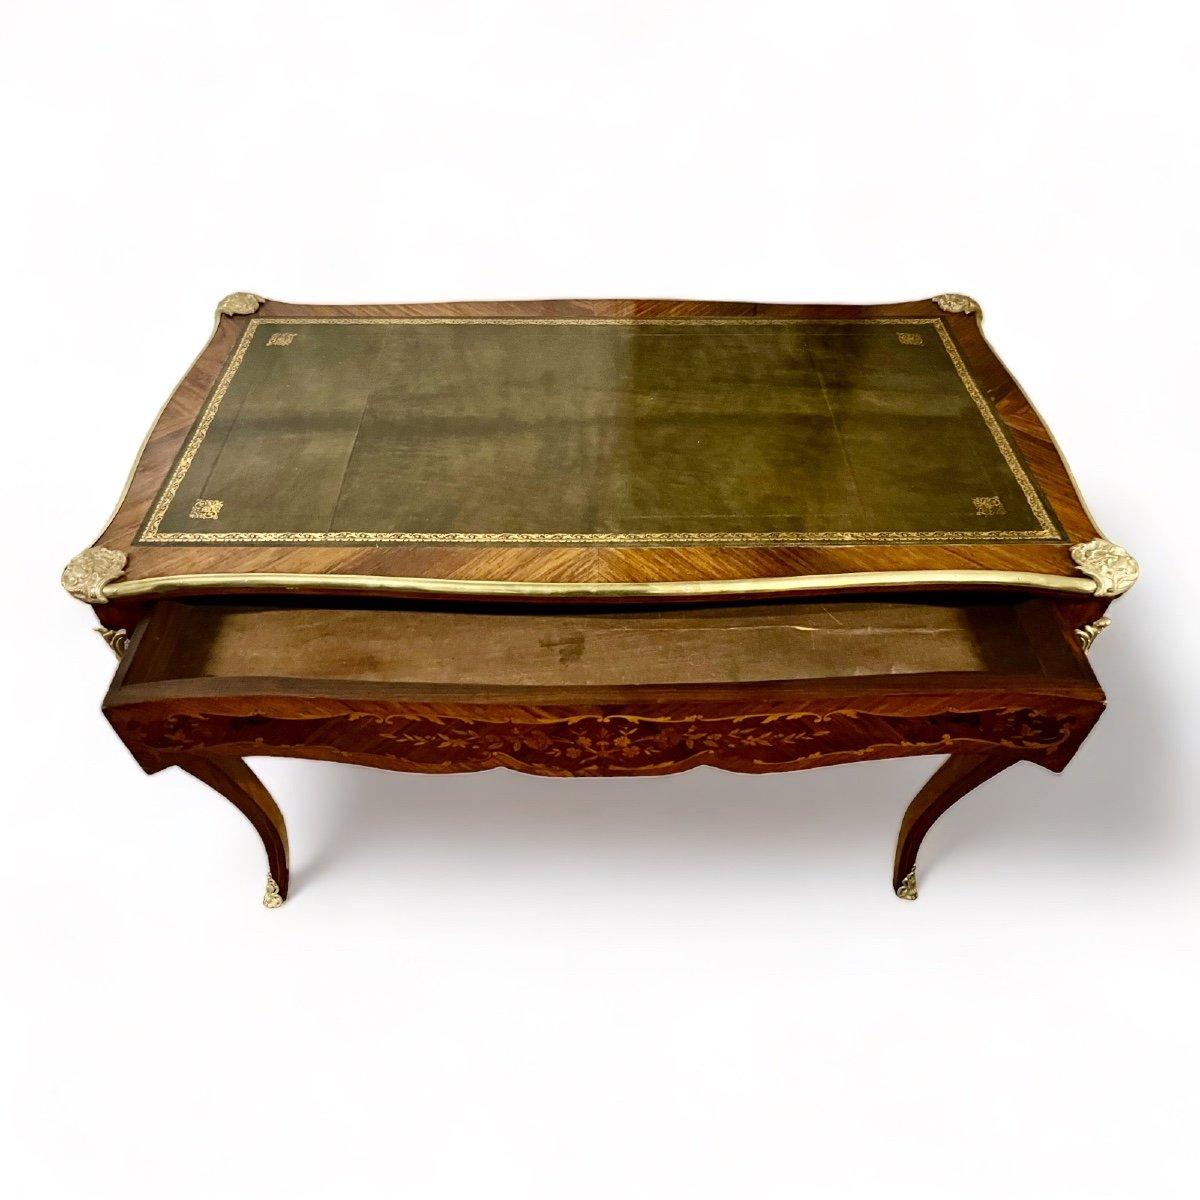 19th Century Louis XV-Style Marquetry Desk with Gilt Bronze Accents For Sale 3